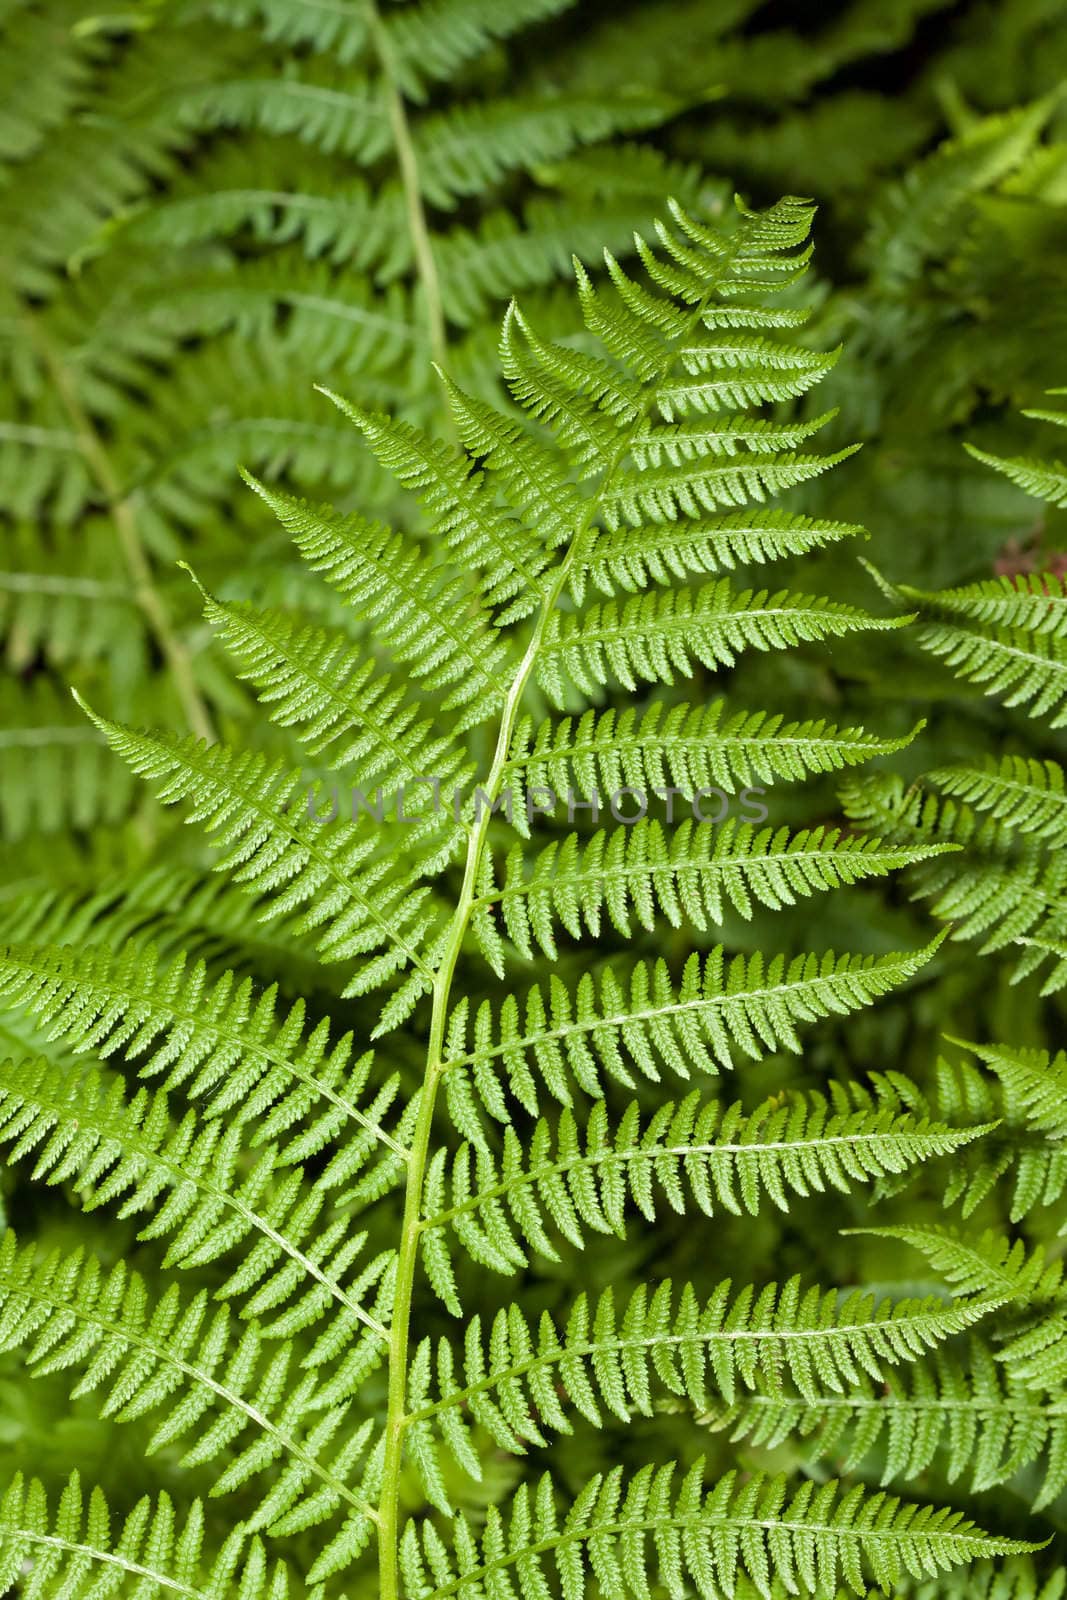 Fern branches out in the wild woods.